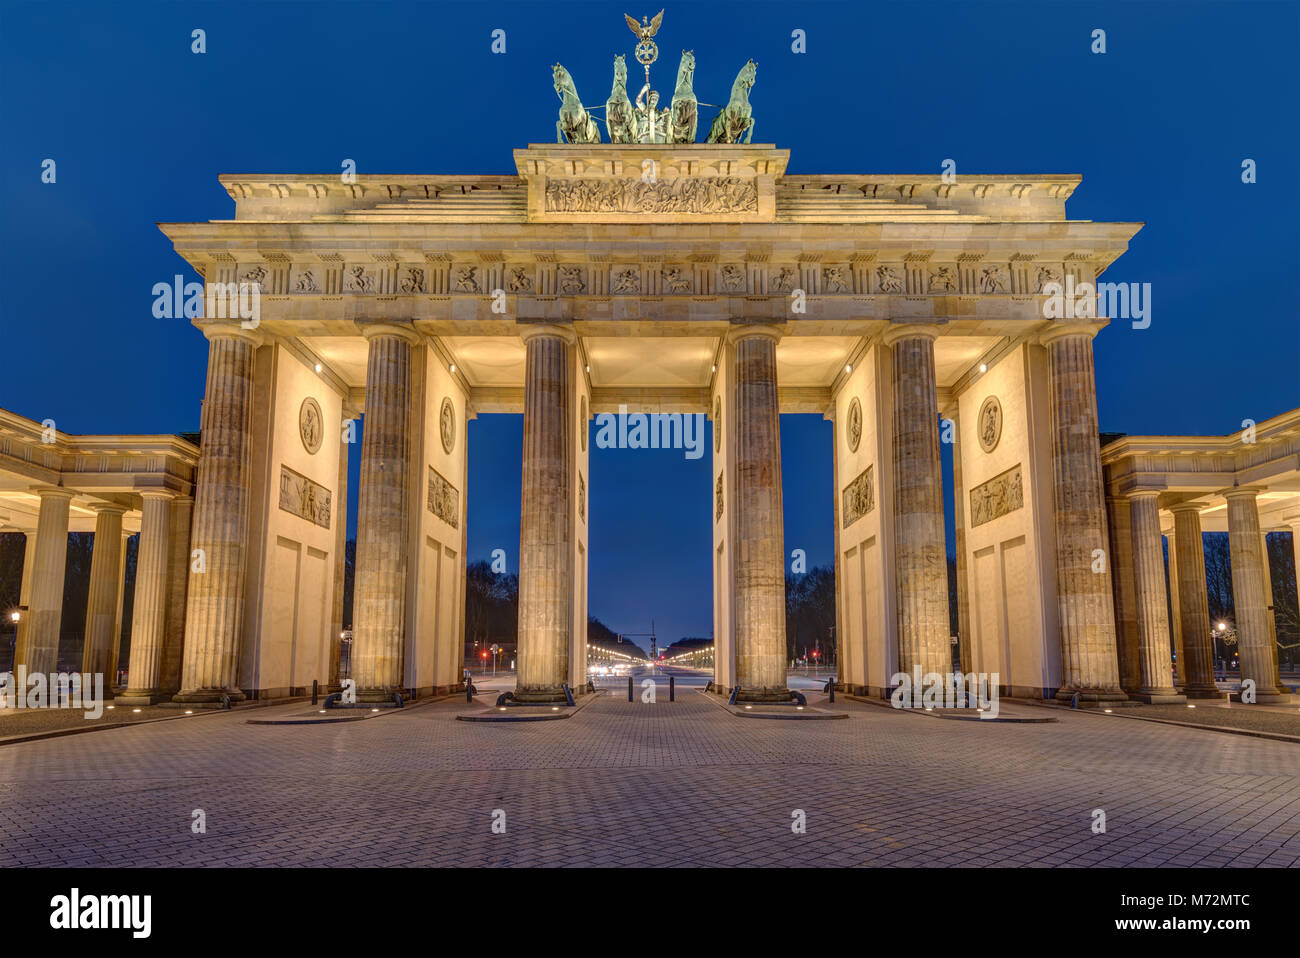 The famous illuminated Brandenburger Tor in Berlin early in the morning Stock Photo